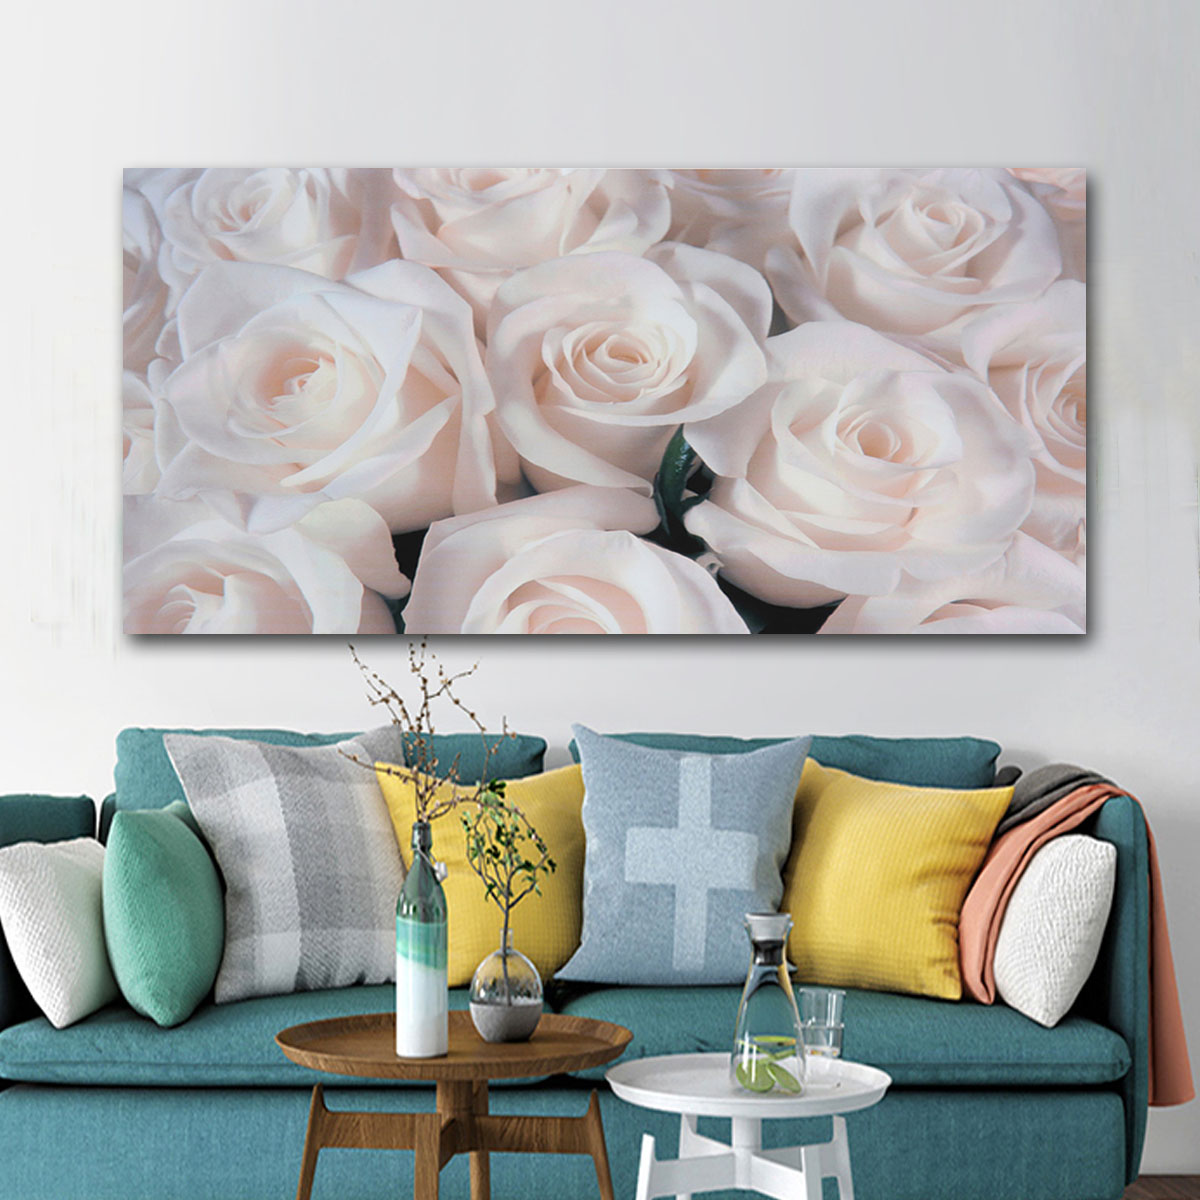 

19"x32" Paintings Roses Blossom Flower Canvas Prints Pictures Art Home Decor Frameless